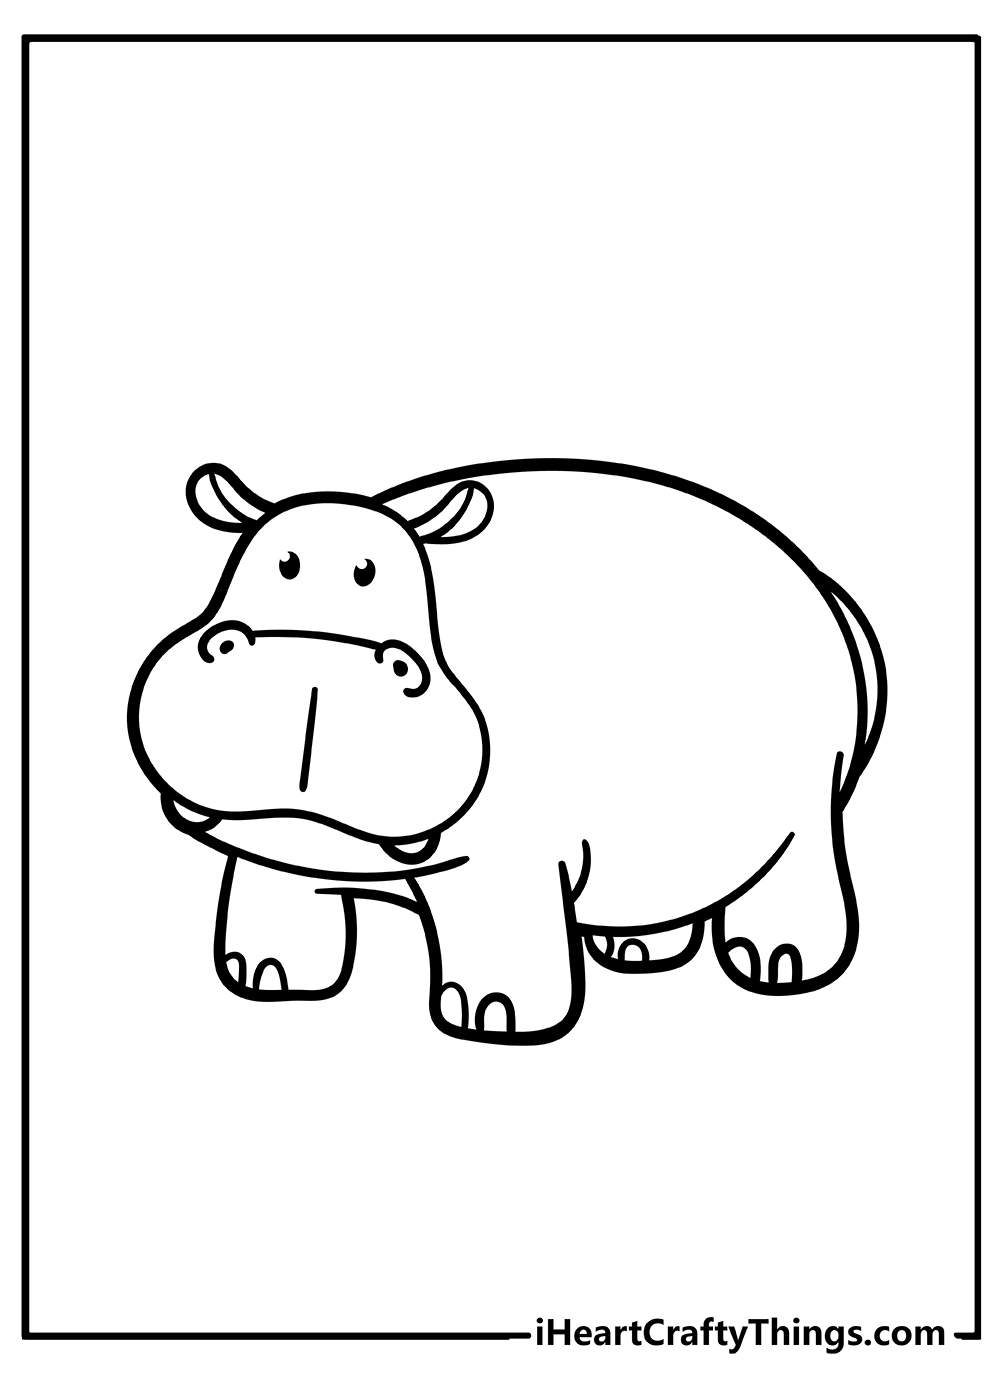 Hippo Coloring Book for kids free printable